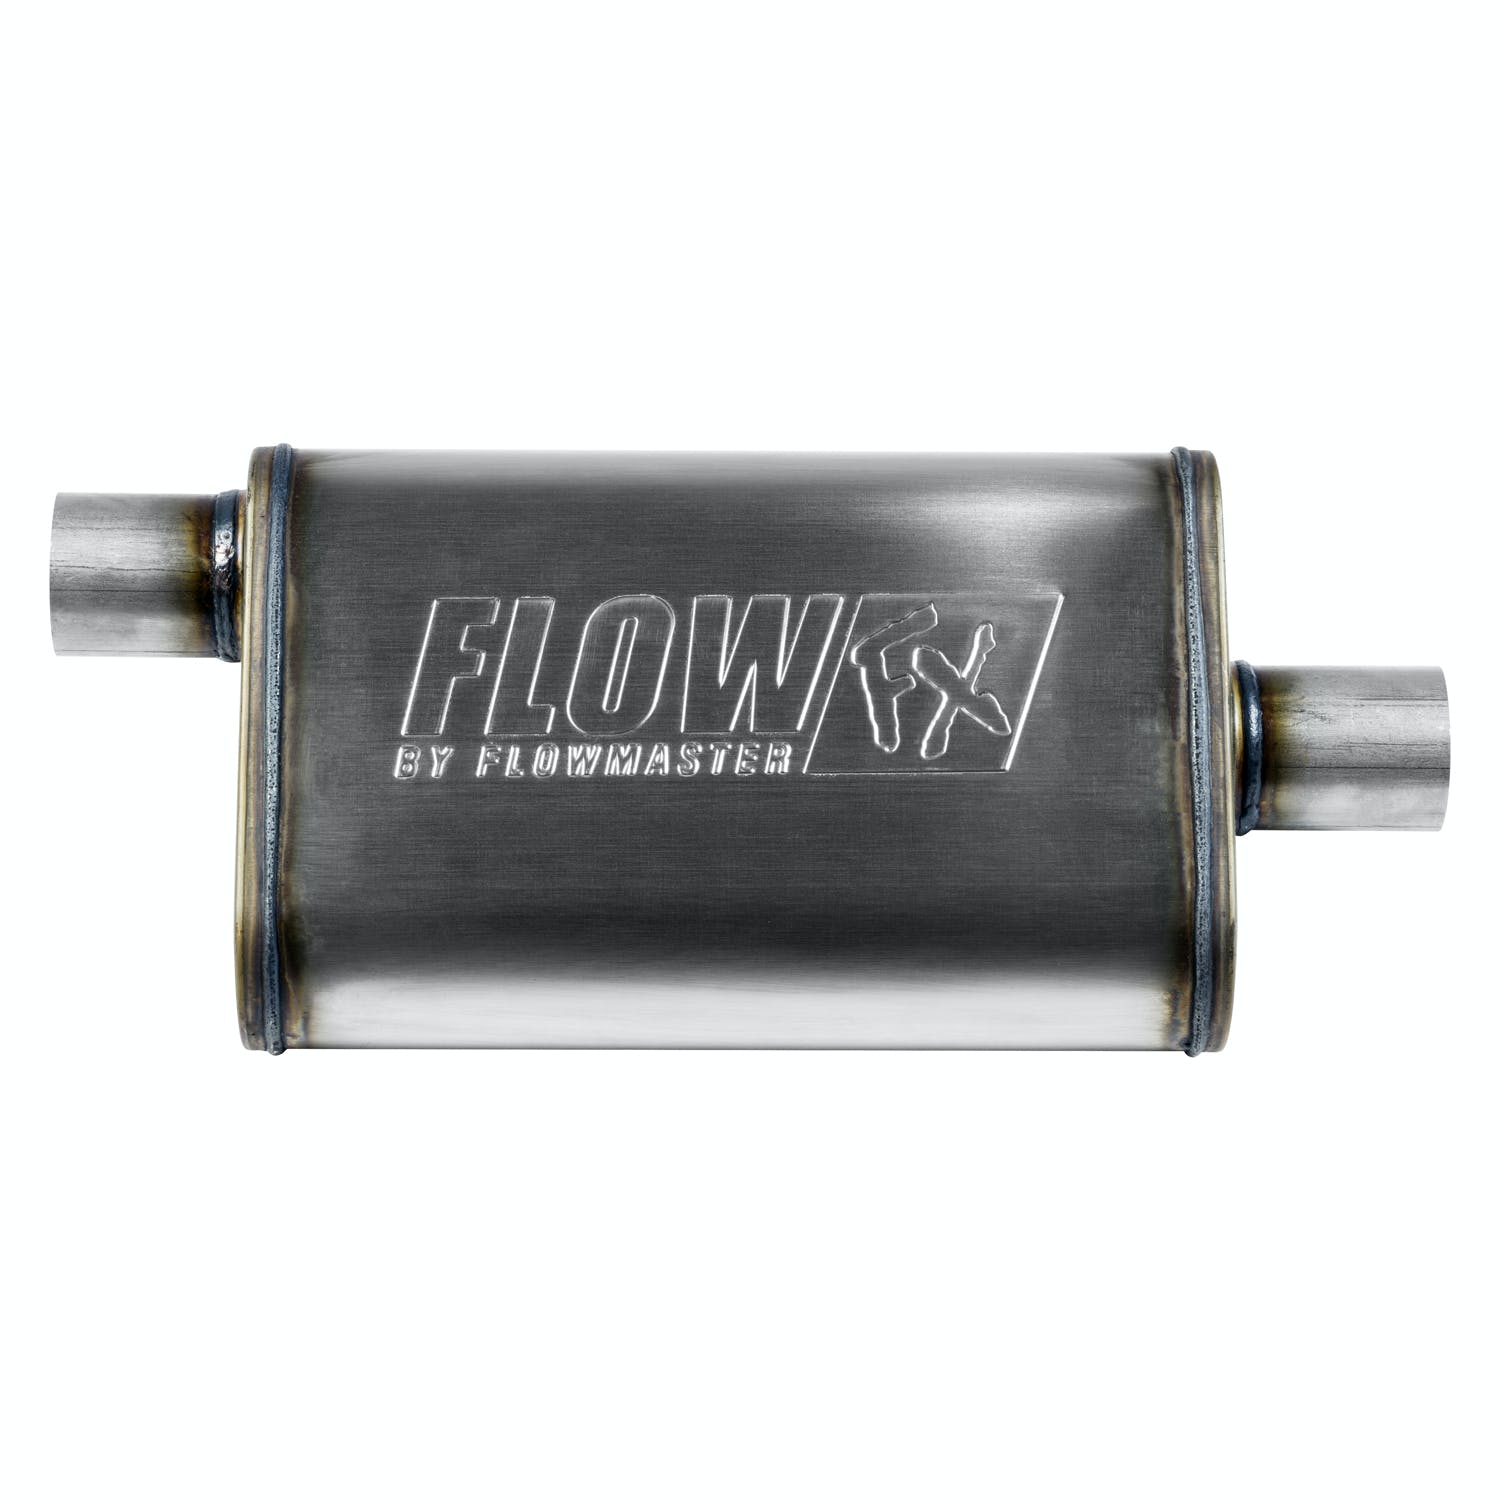 Flowmaster 71225 Flow FX Series Muffler 2.5 in in/out